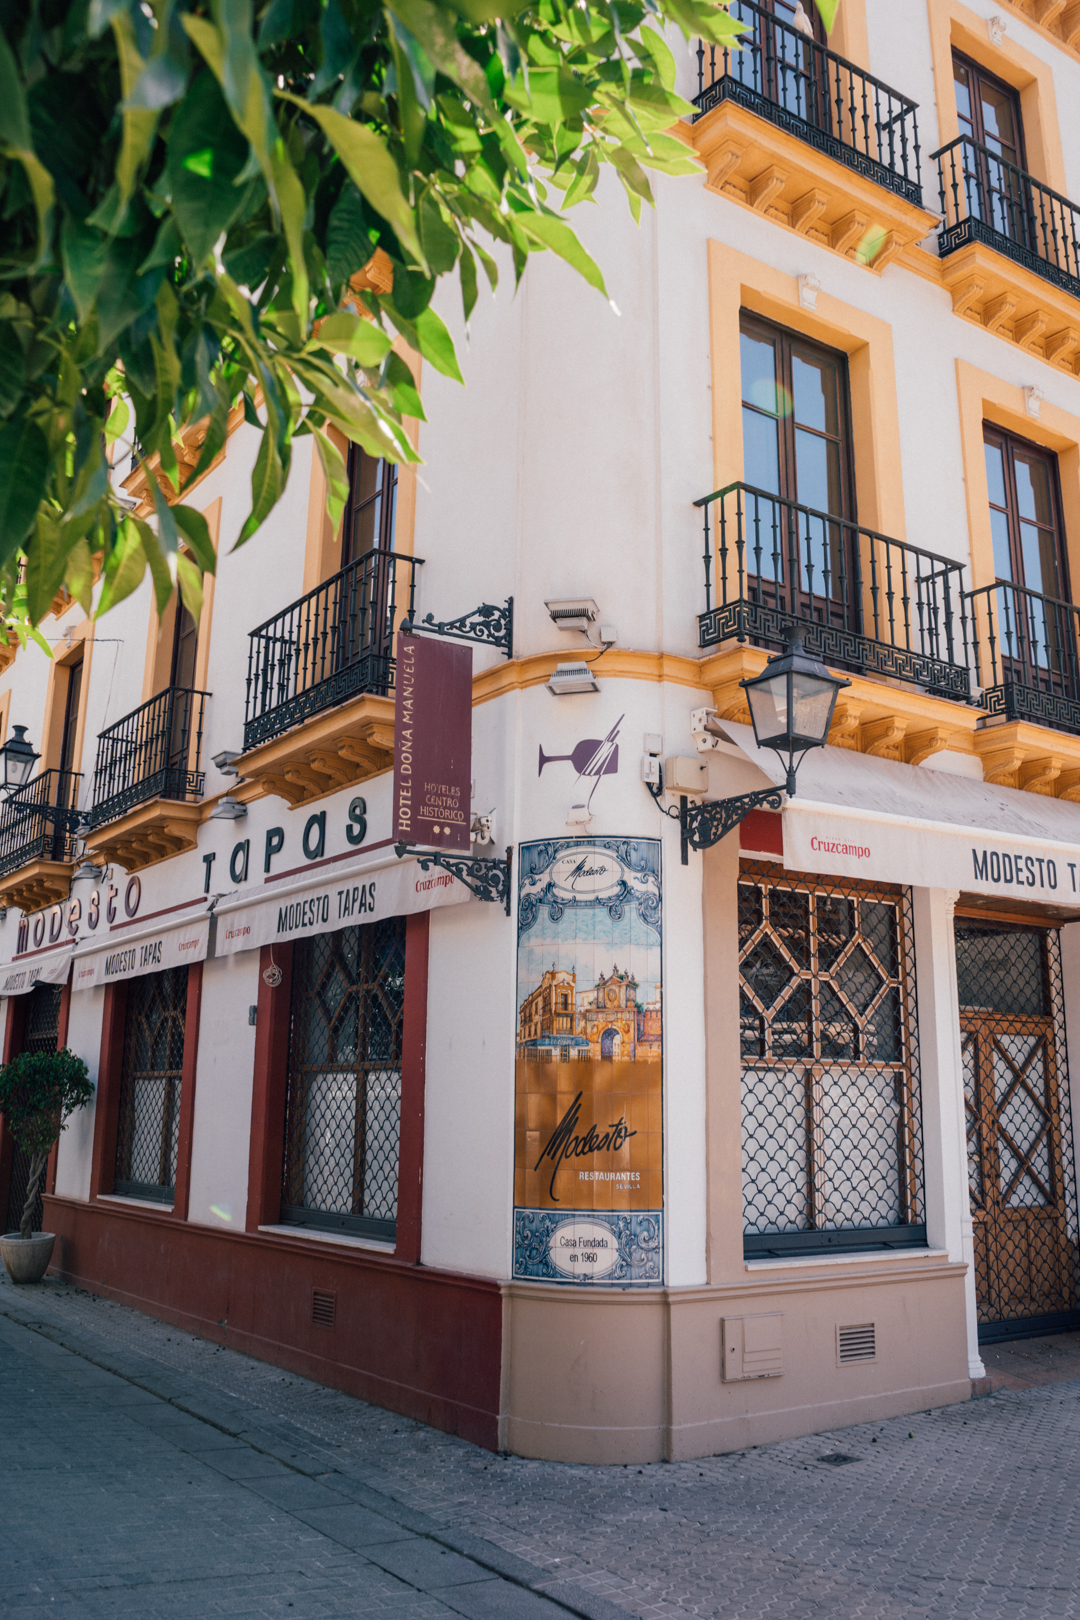 Is Seville worth visiting?